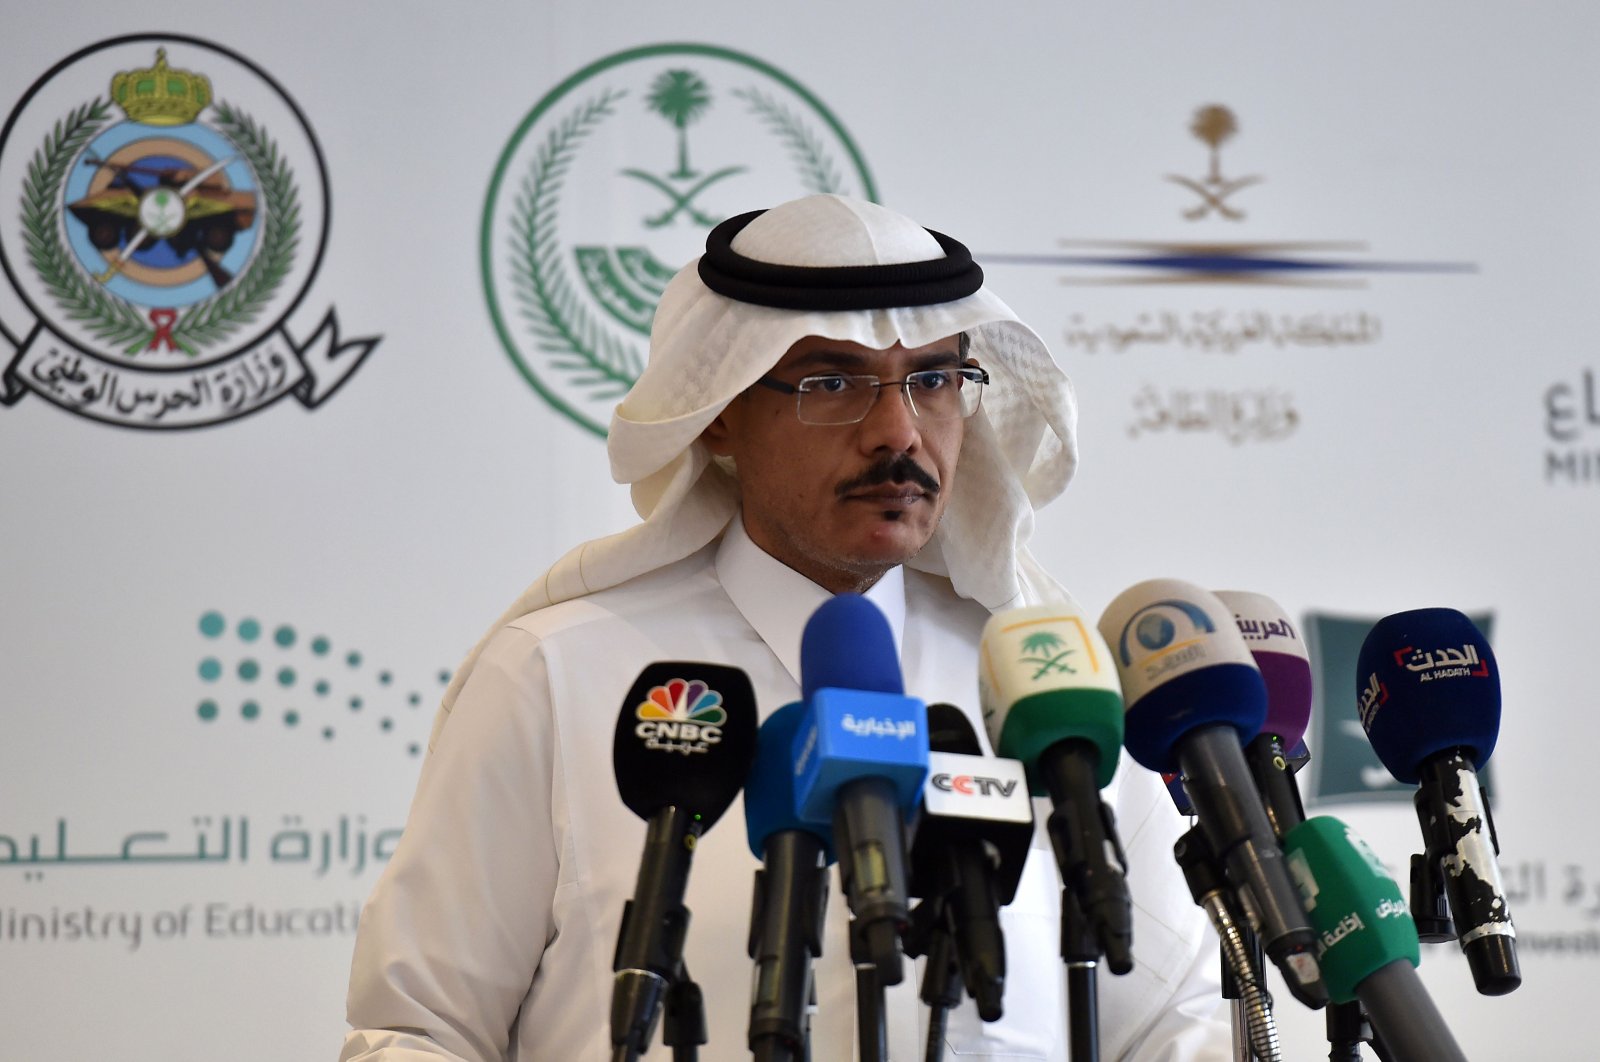 Mohammed Alabed Alali, Saudi Arabia's health minstry spokesman, addresses reporters during a press briefing about COVID-19 coronavirus disease, in the capital Riyadh on March 8, 2020 (AFP Photo)